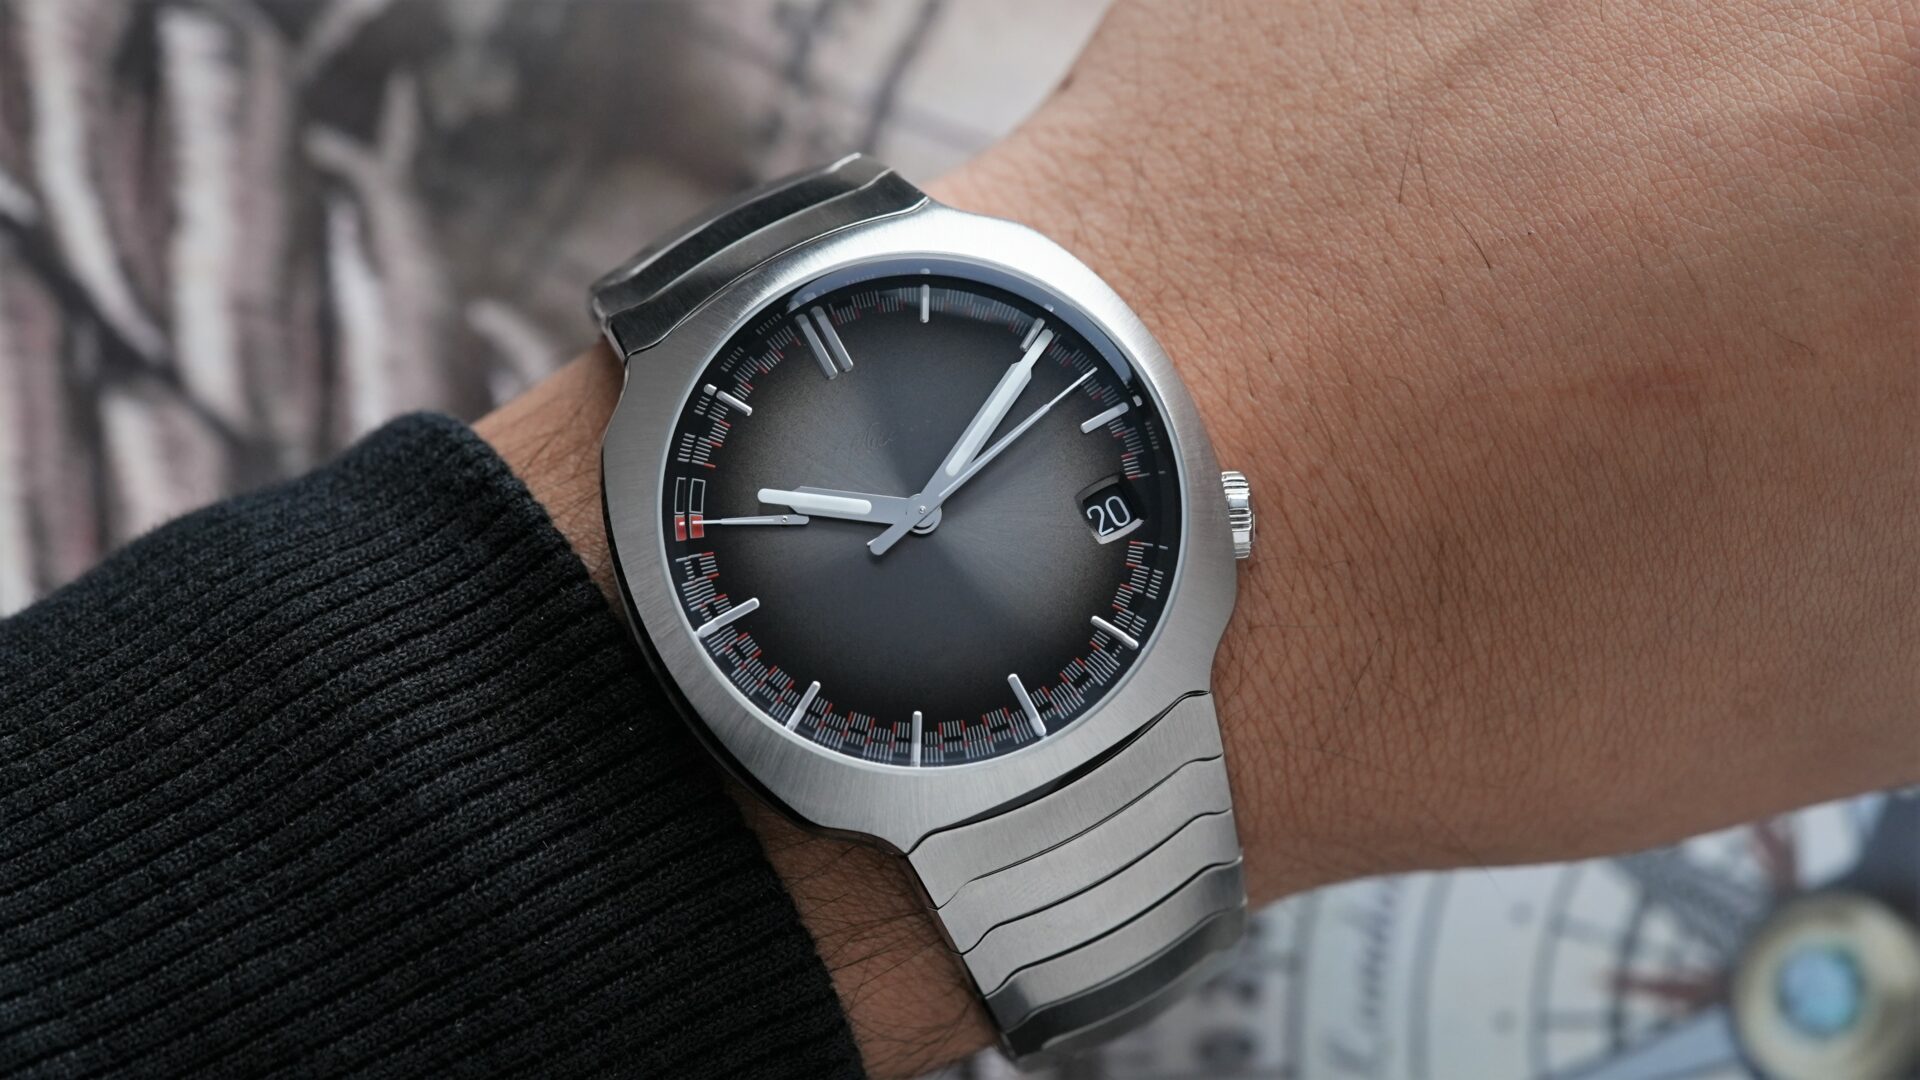 H.Moser & Cie. Streamliner Perpetual Calendar 6812-1200 watch featured on the wrist.